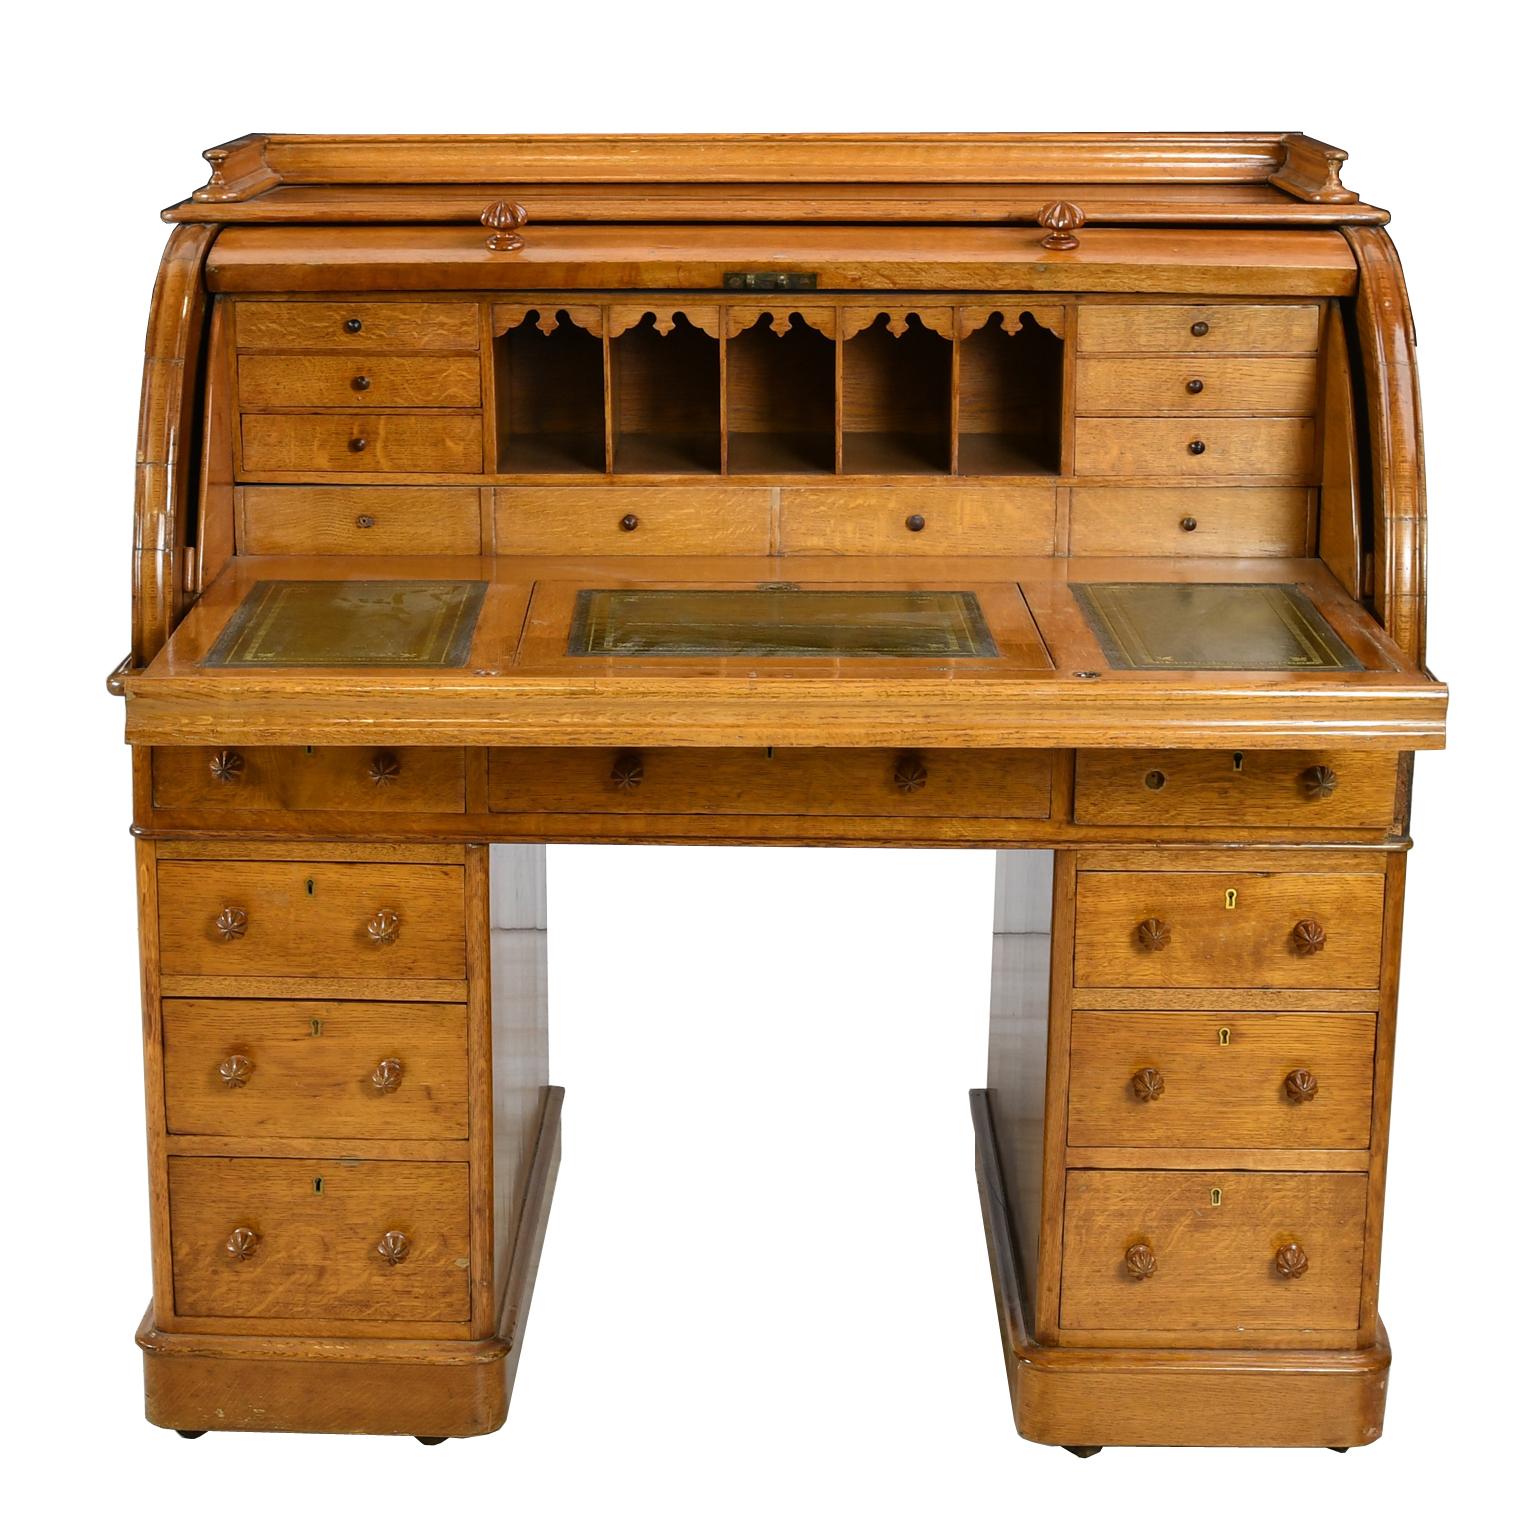 A more compact version of a classic model, this functional pedestal desk in light, golden oak is unusual in that it can float in a room and has the original casters, making it mobile too. Features a gallery above a cylinder top that opens to a desk